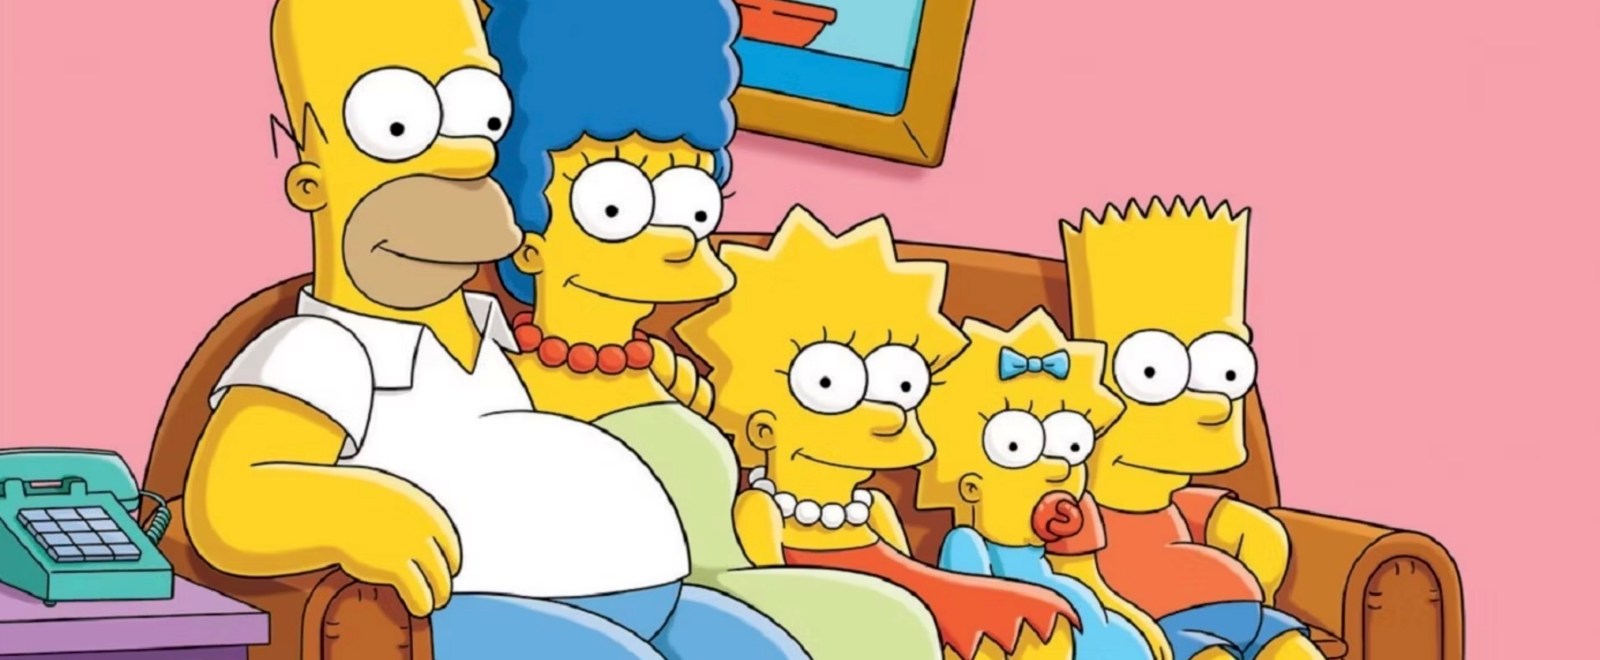 Elon Musk Must Be Worried After ‘The Simpsons’ Predicted A Bleak End To ...